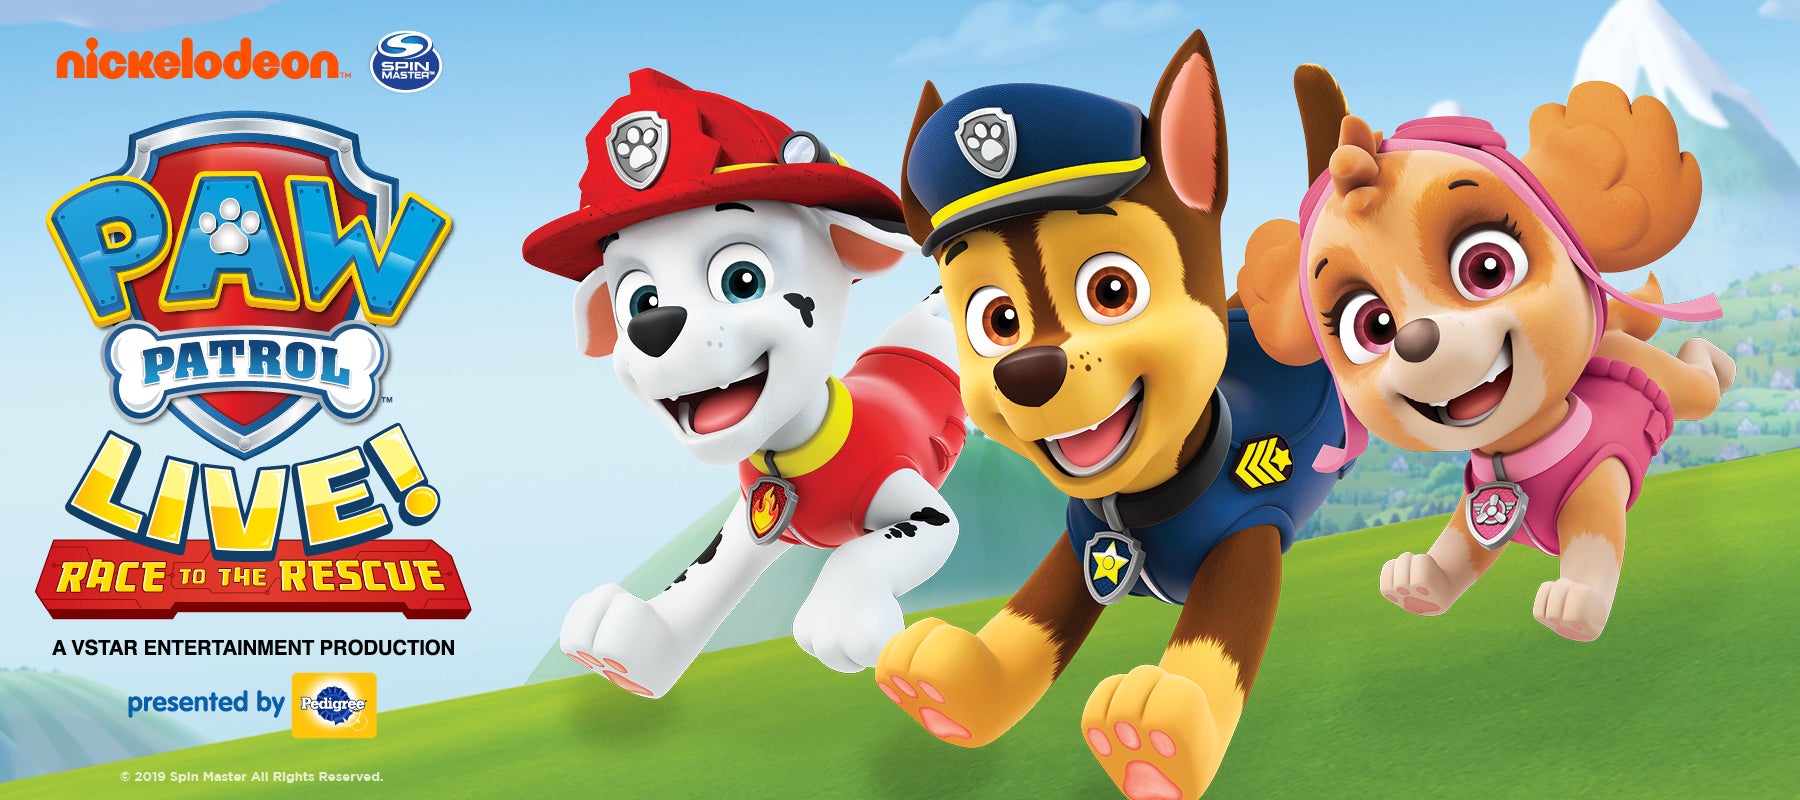 Paw Patrol Live! Race to the Rescue